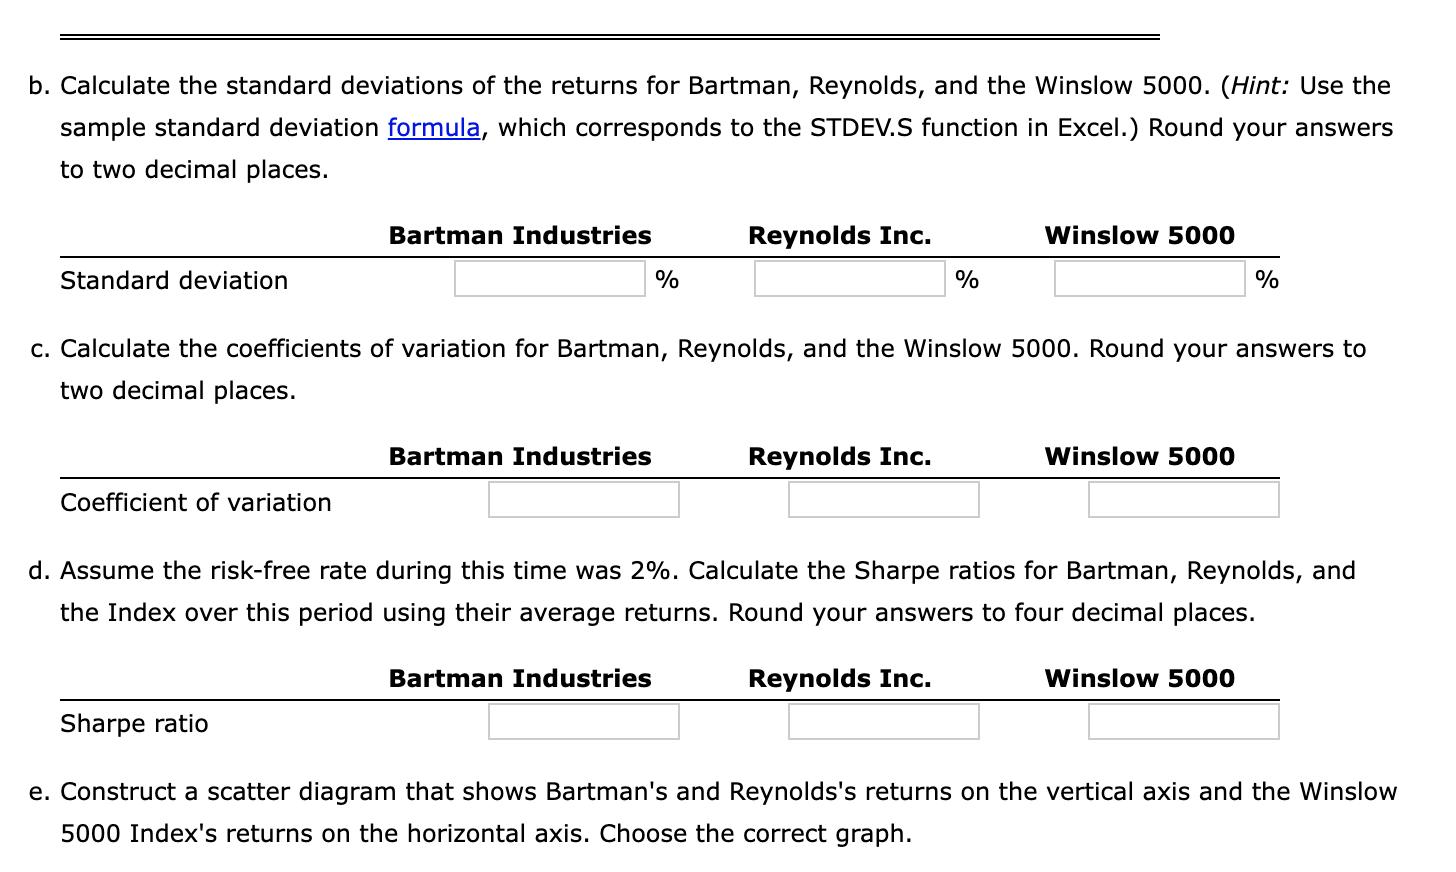 b. Calculate the standard deviations of the returns for Bartman, Reynolds, and the Winslow 5000 . (Hint: Use the sample stand